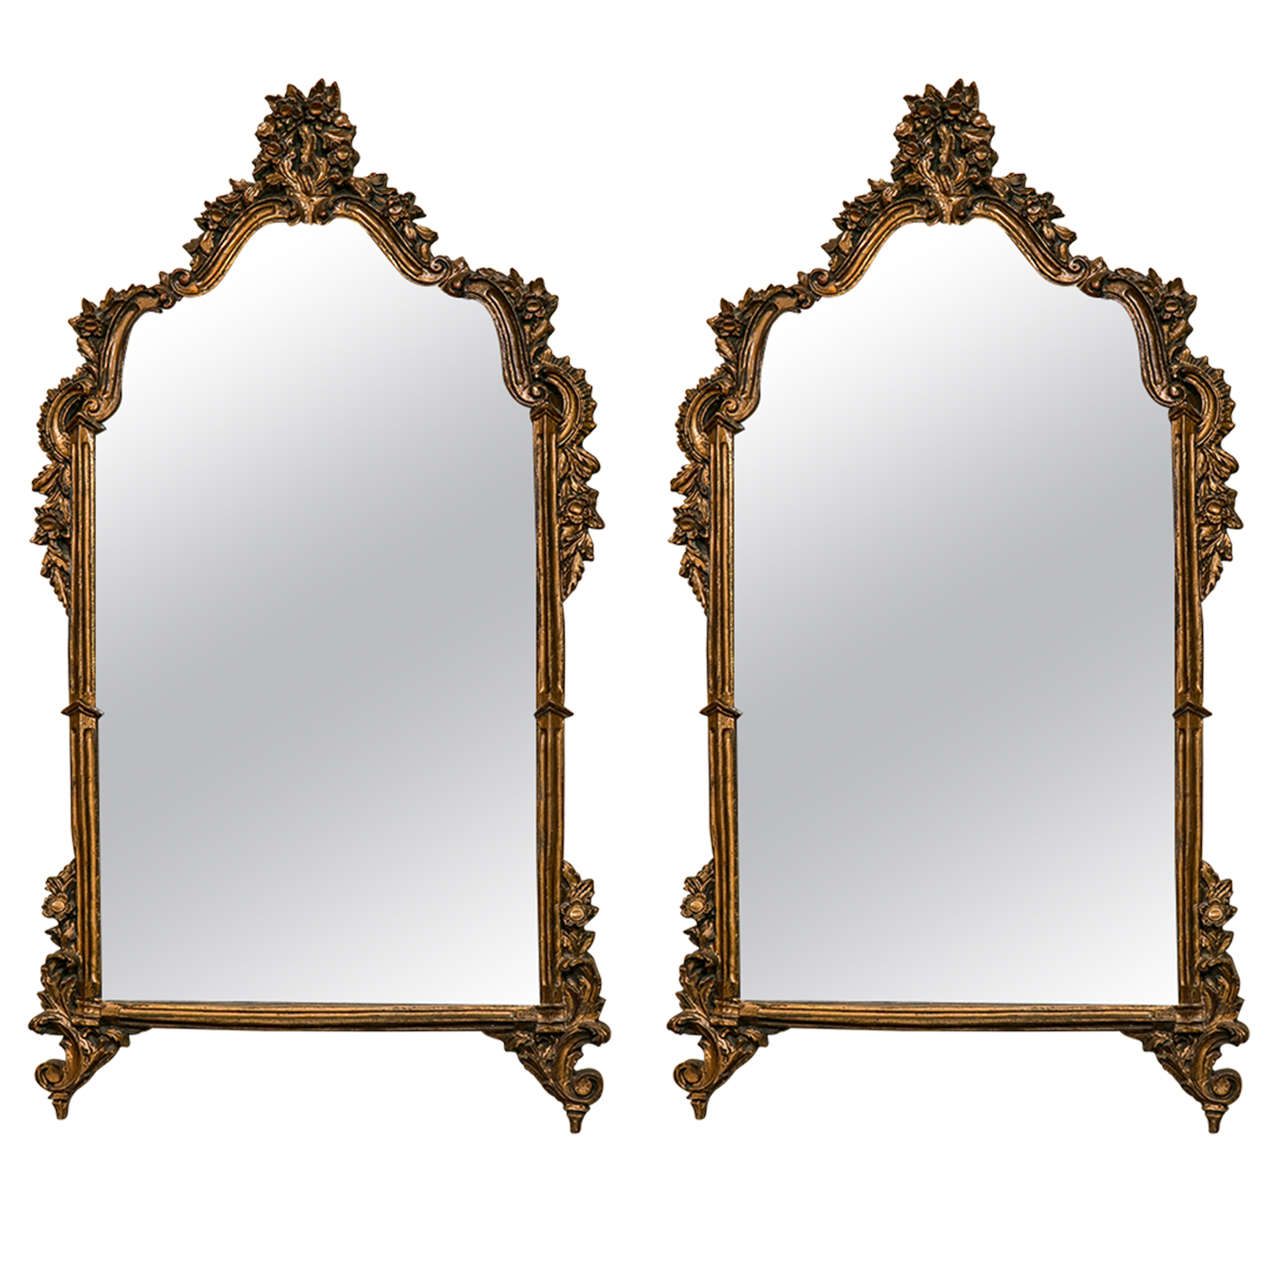 Pair of Louis XVI Style Mirrors in Gilt Gold Finish